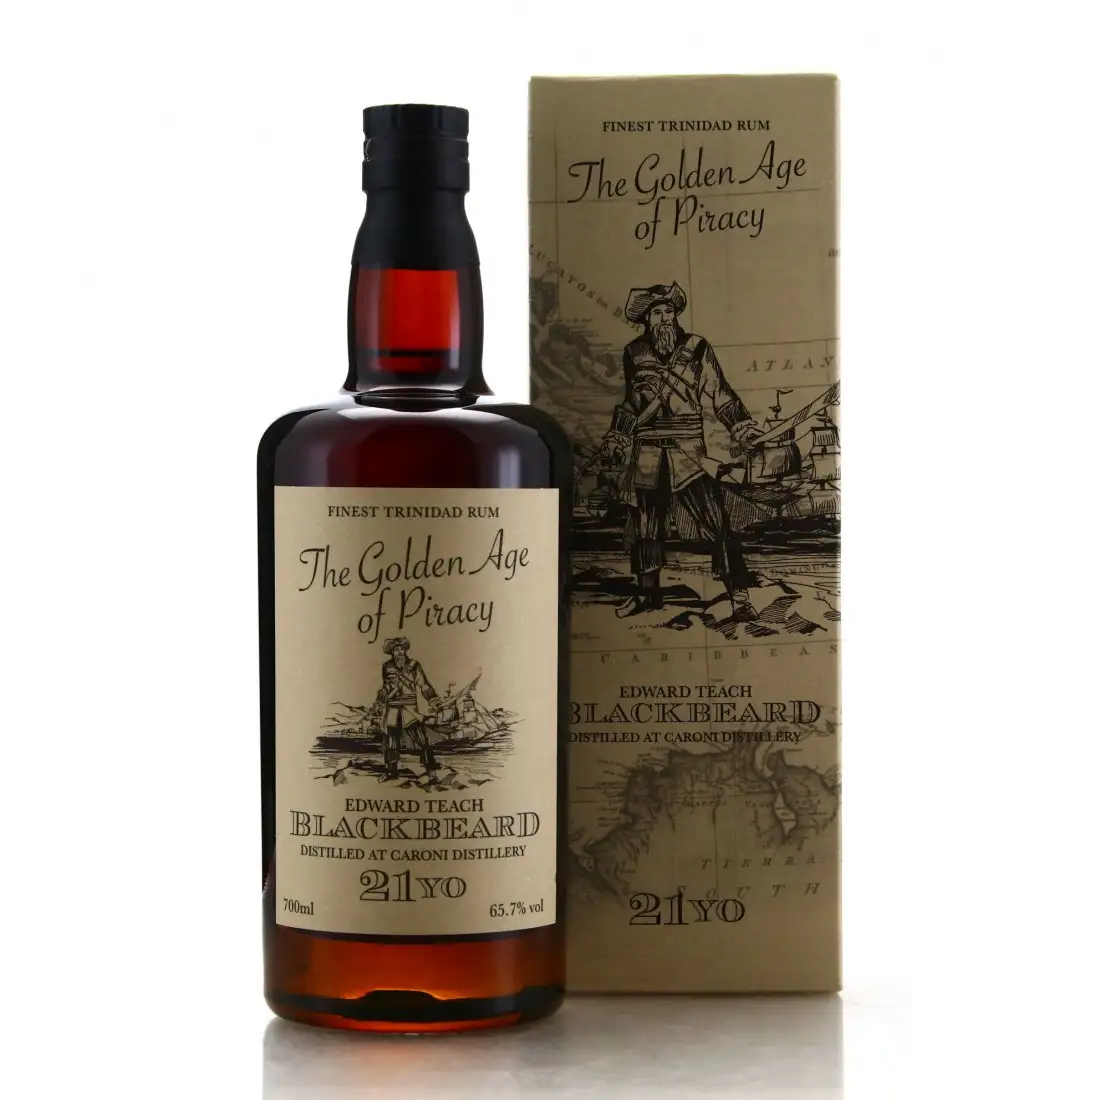 Image of the front of the bottle of the rum The Golden Age of Piracy Edward Teach Blackbeard